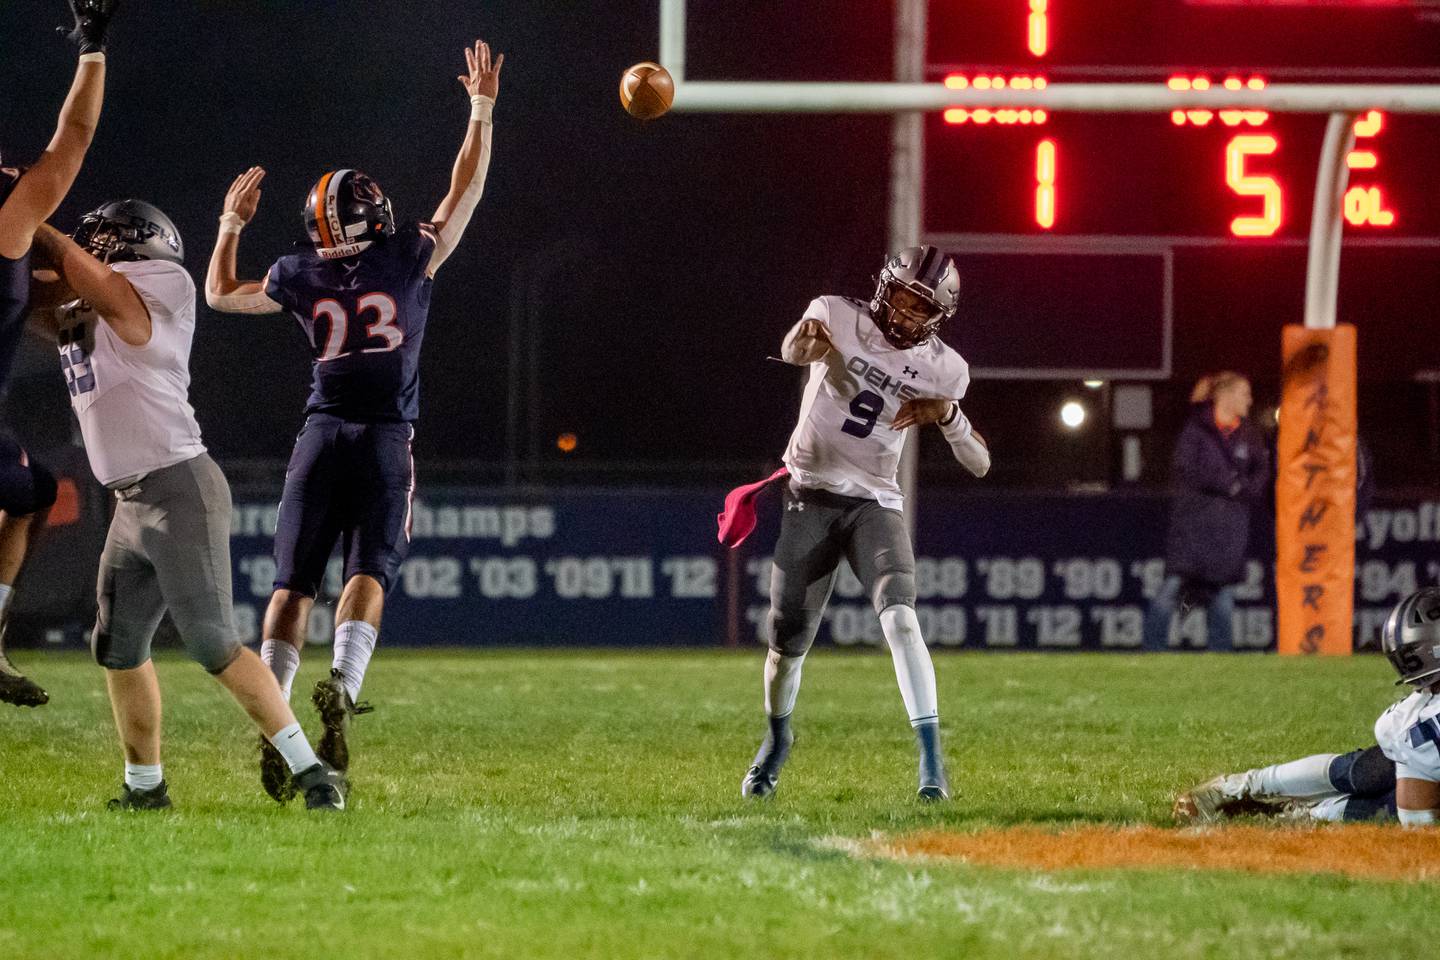 Oswego East's Tre Jones (9) throws a pass against Oswego during a high school football game at Oswego High School in Oswego on Friday, Oct 15, 2021.